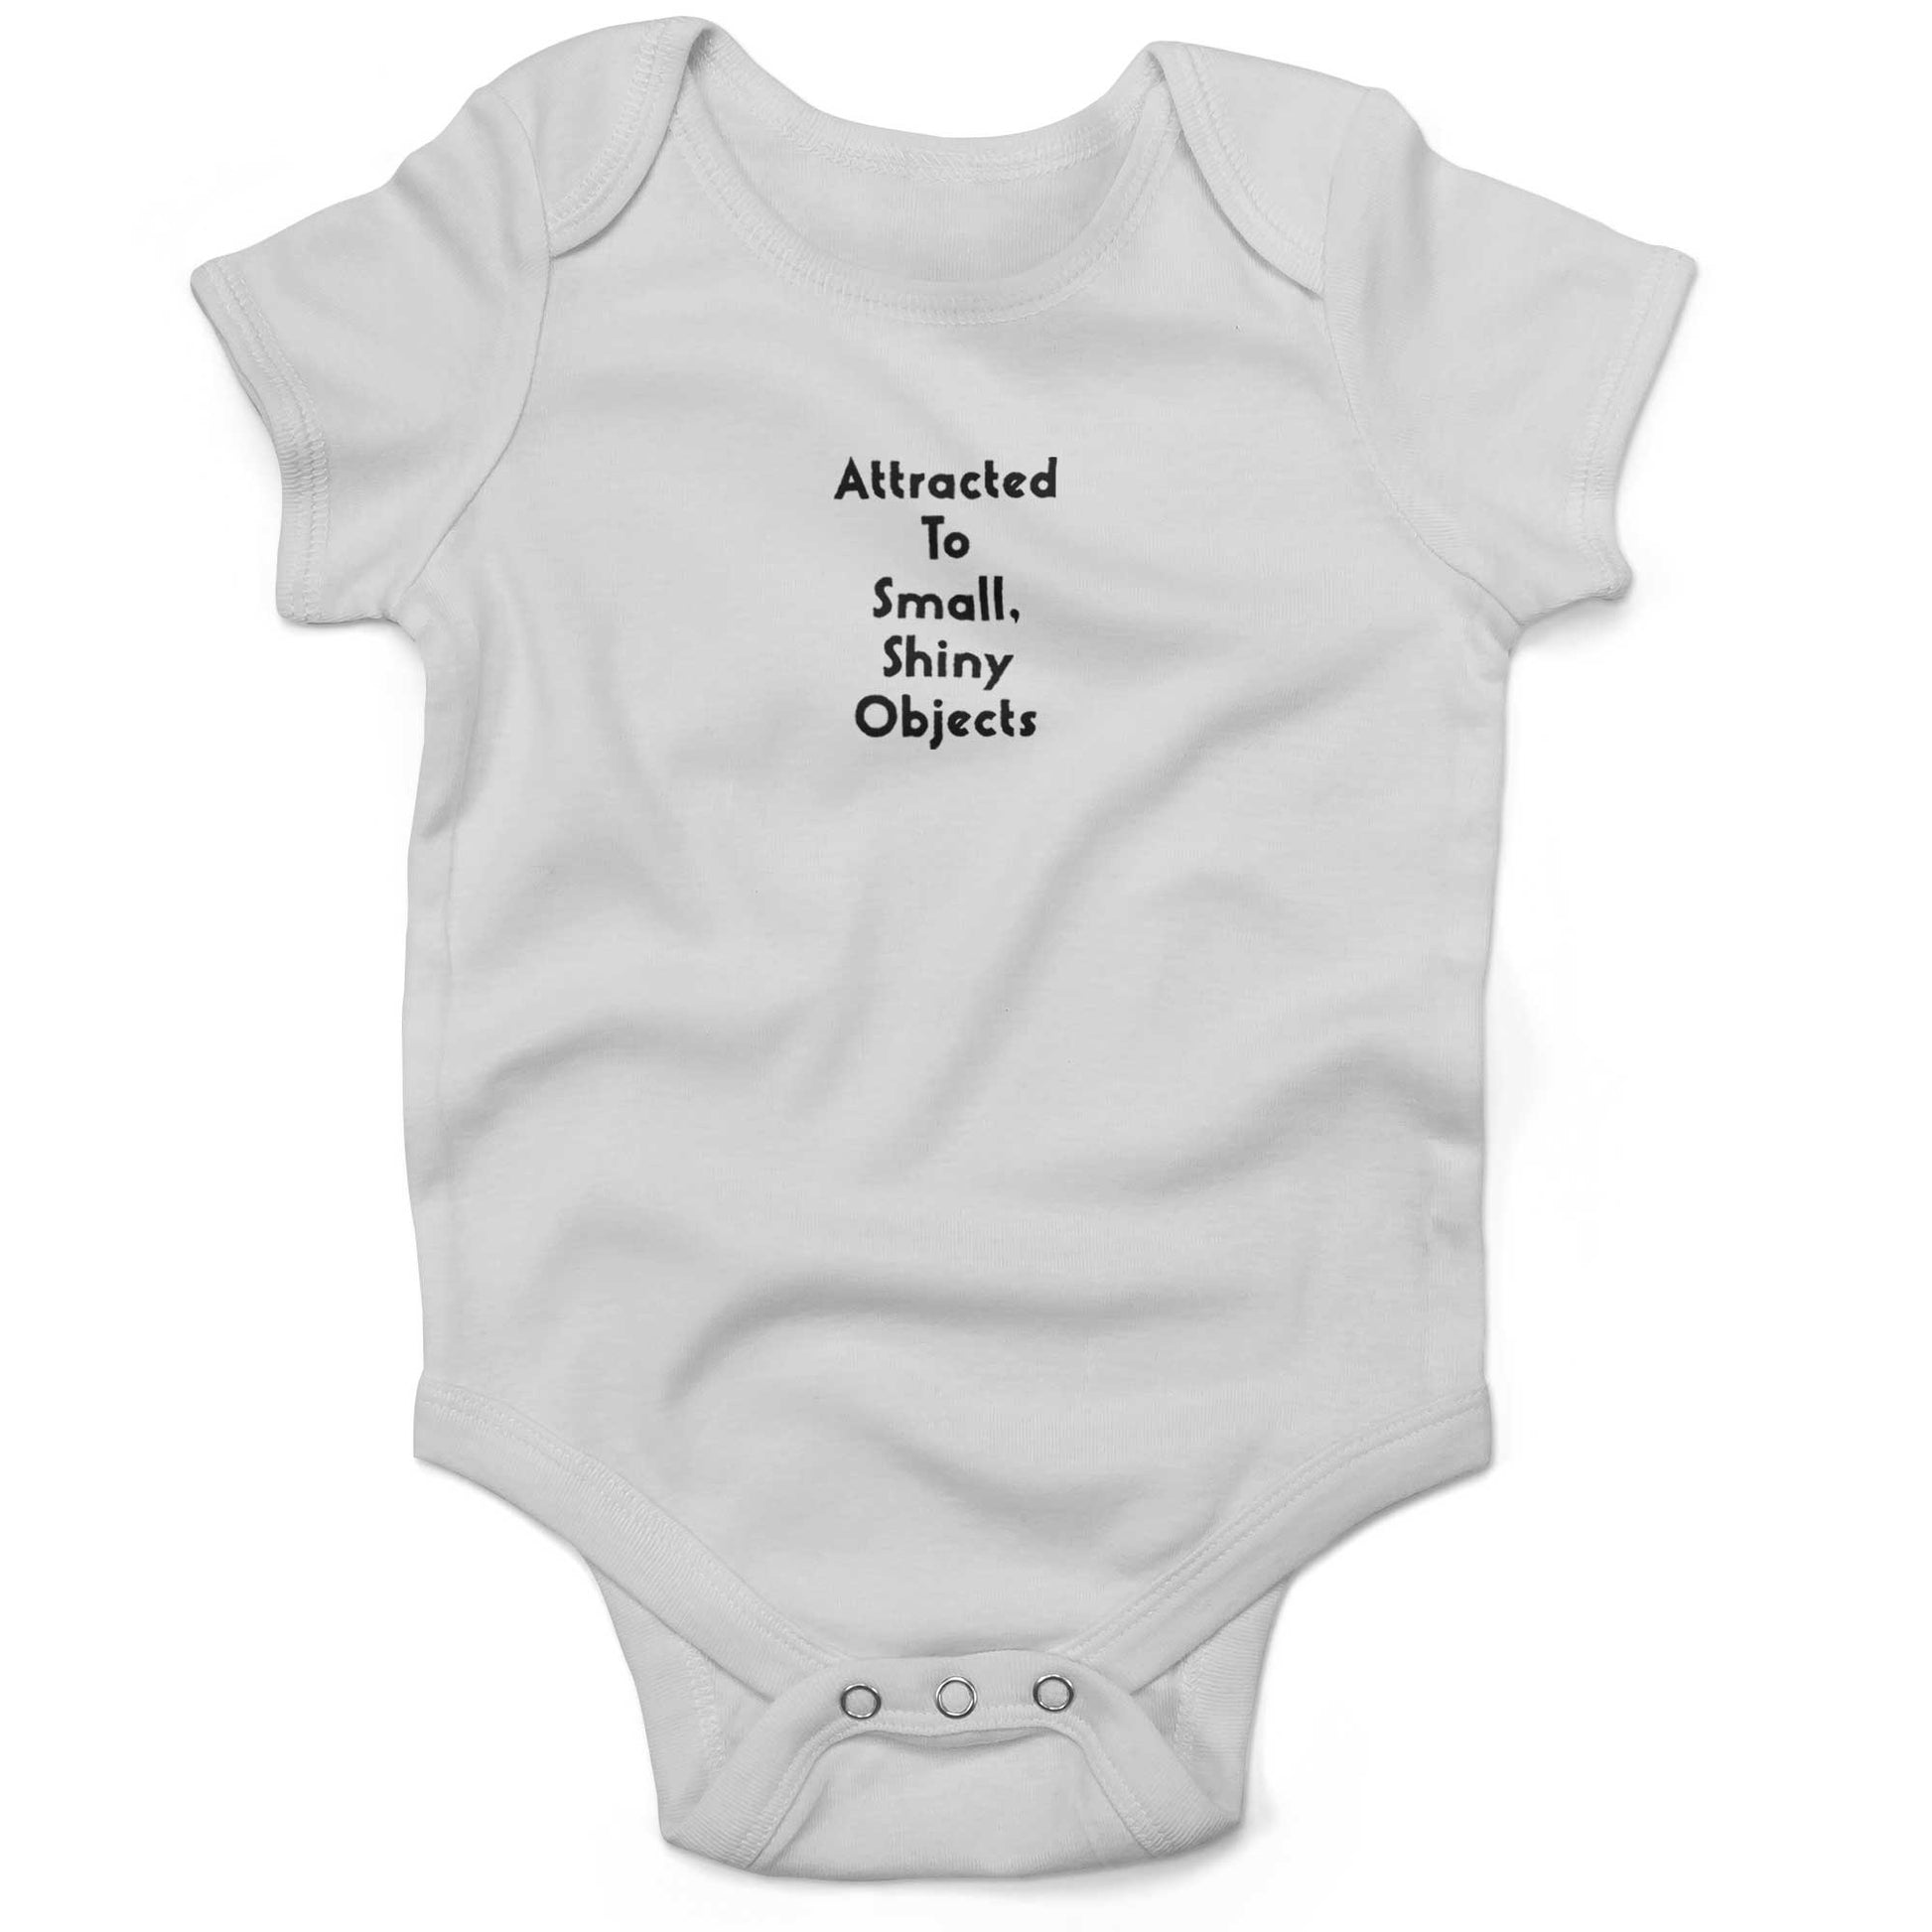 Attracted To Small, Shiny Objects Baby One Piece-White-3-6 months